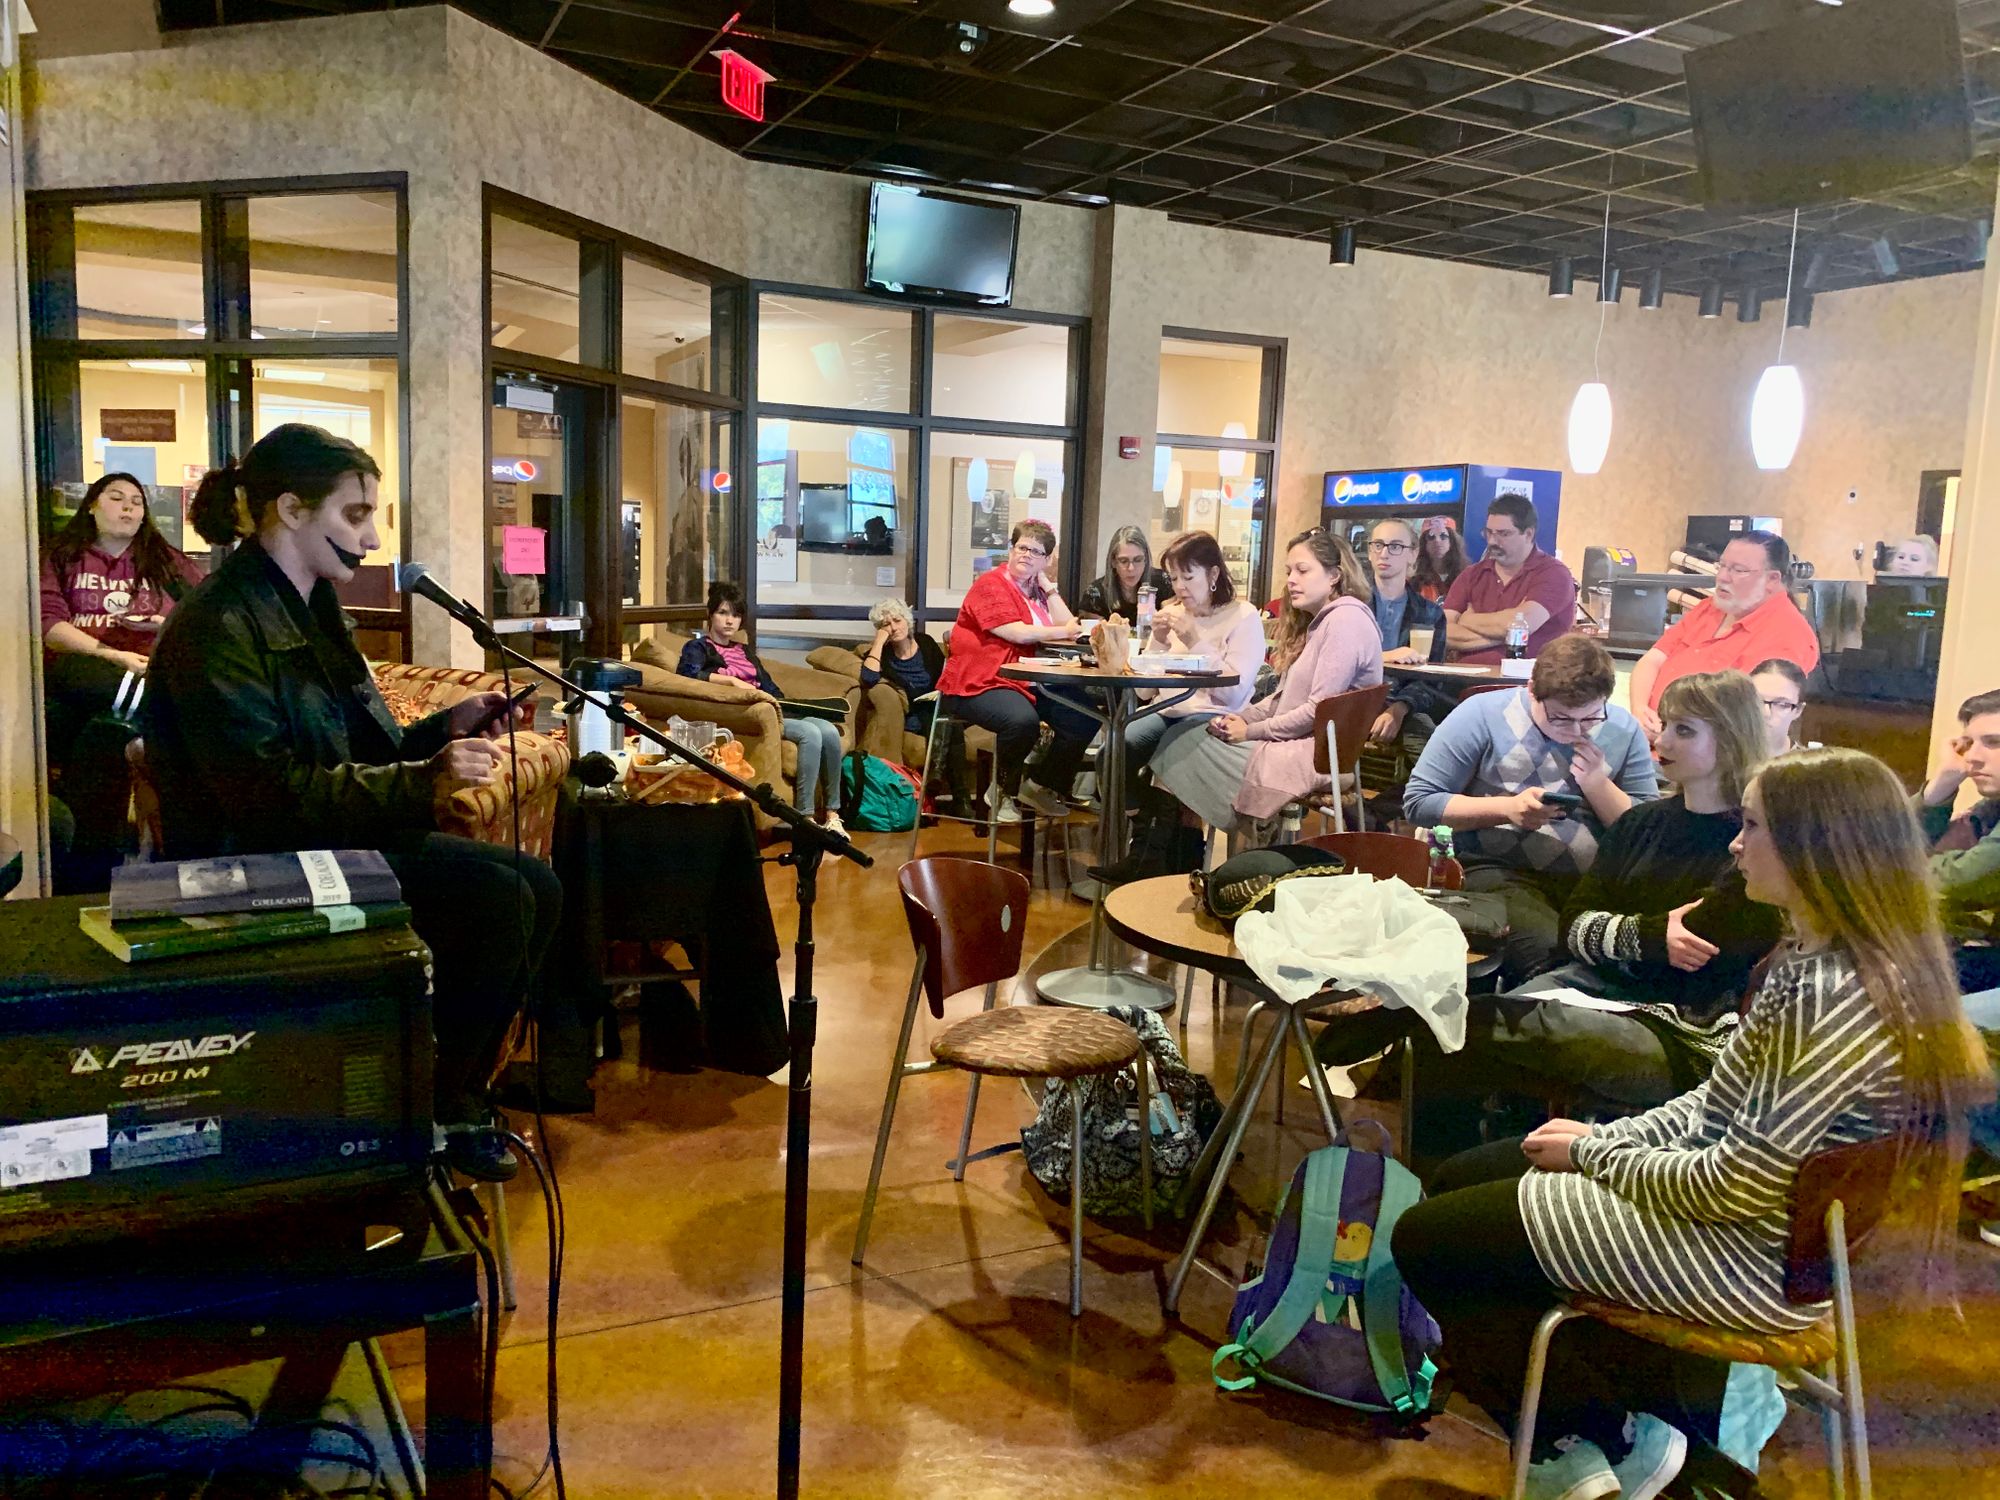 Open Mic is a hit for lit students